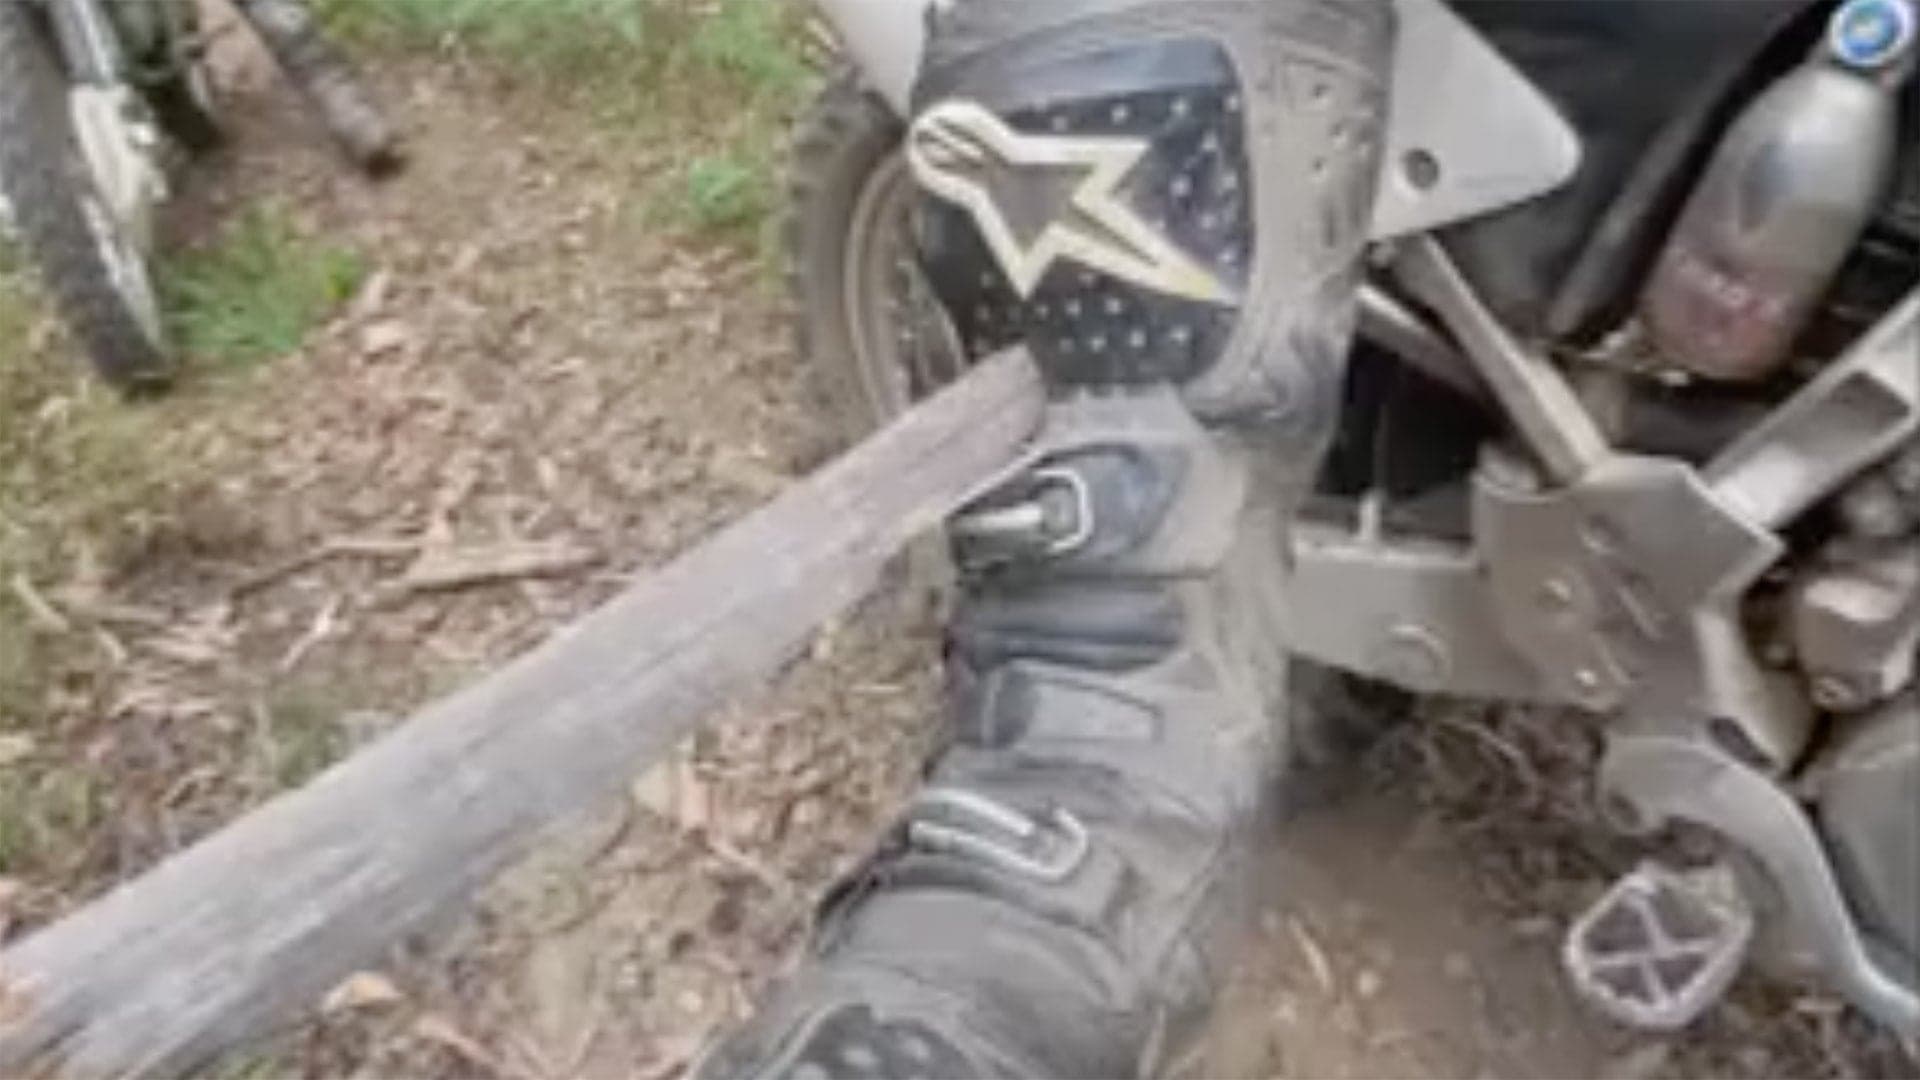 Fearless Dirt Biker Rides Back to Base After Being Impaled By a Branch